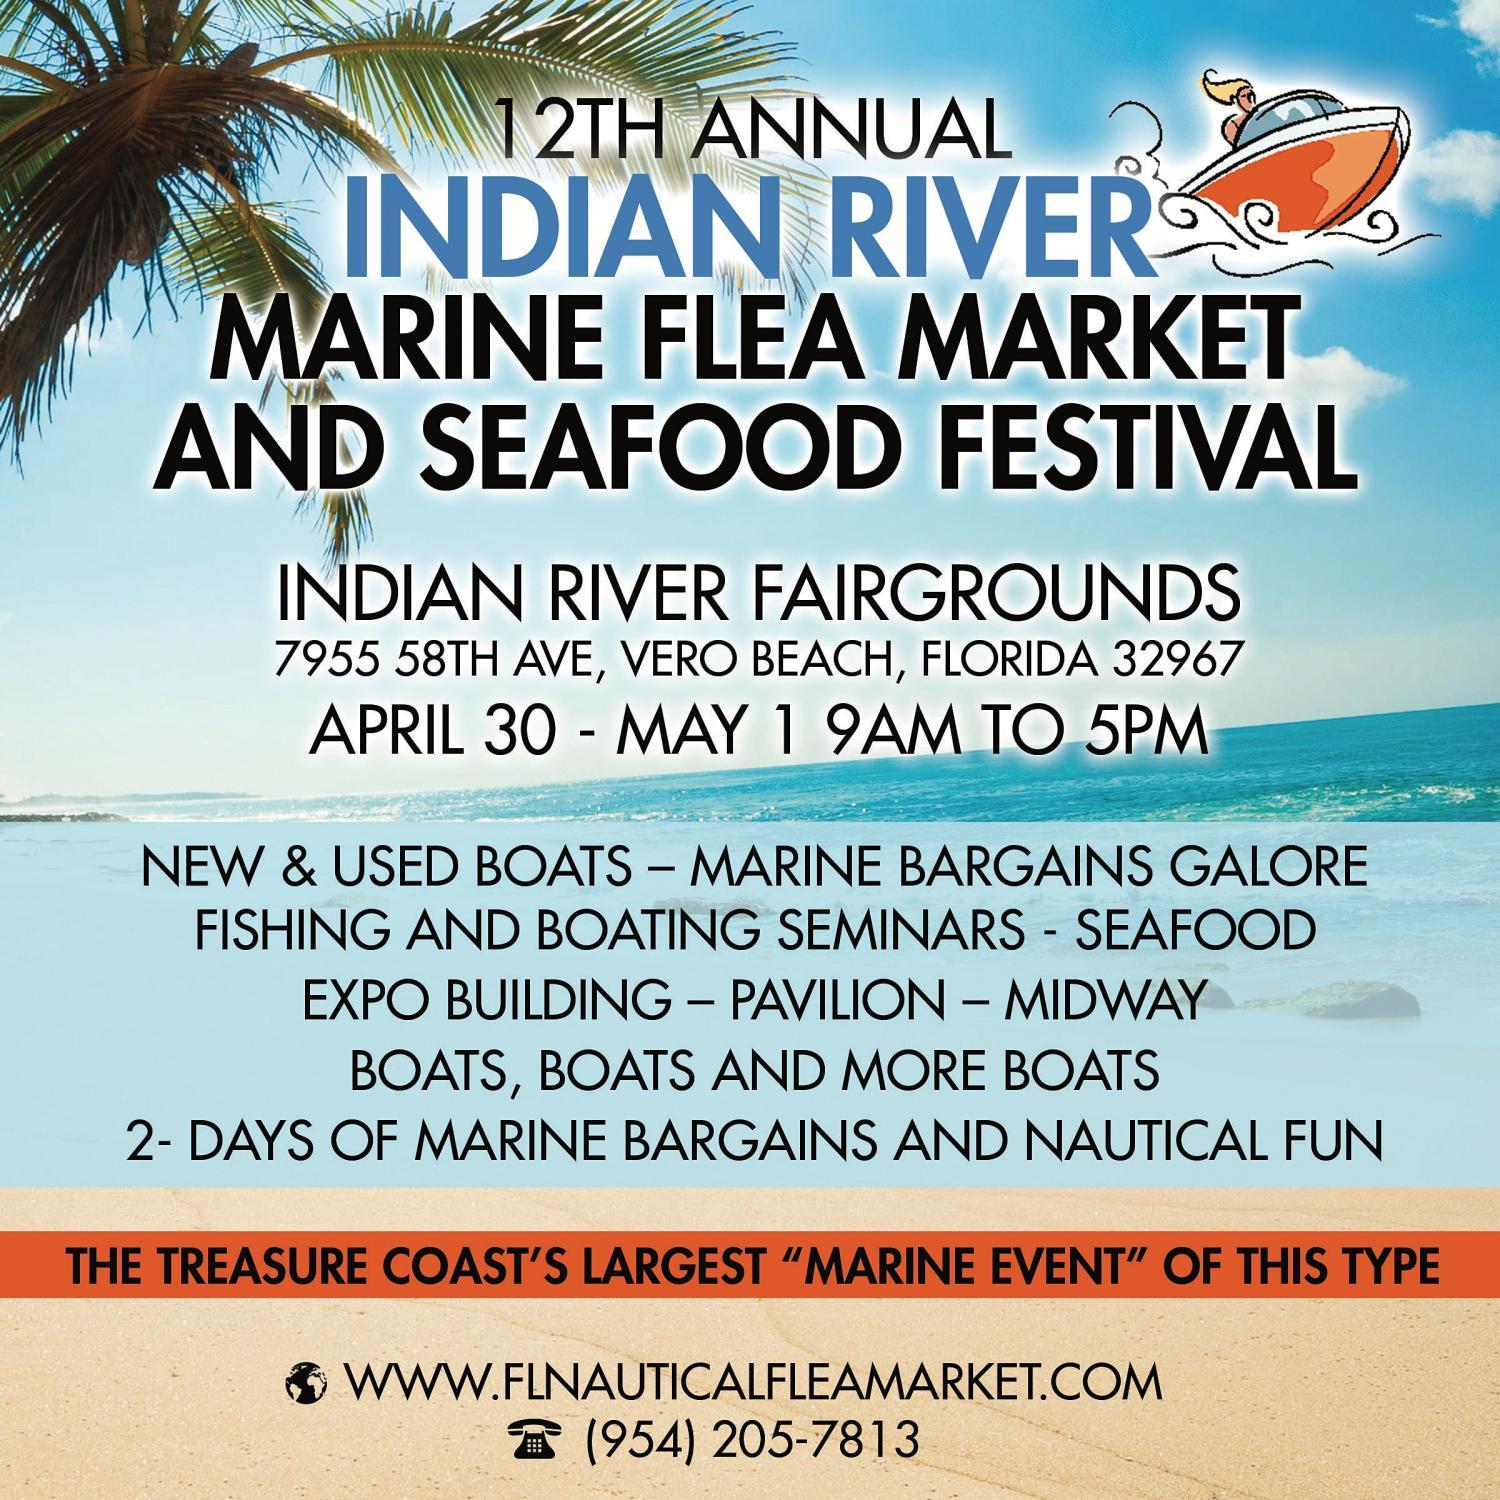 12th Annual Indian River Marine Flea Market and Seafood Festival